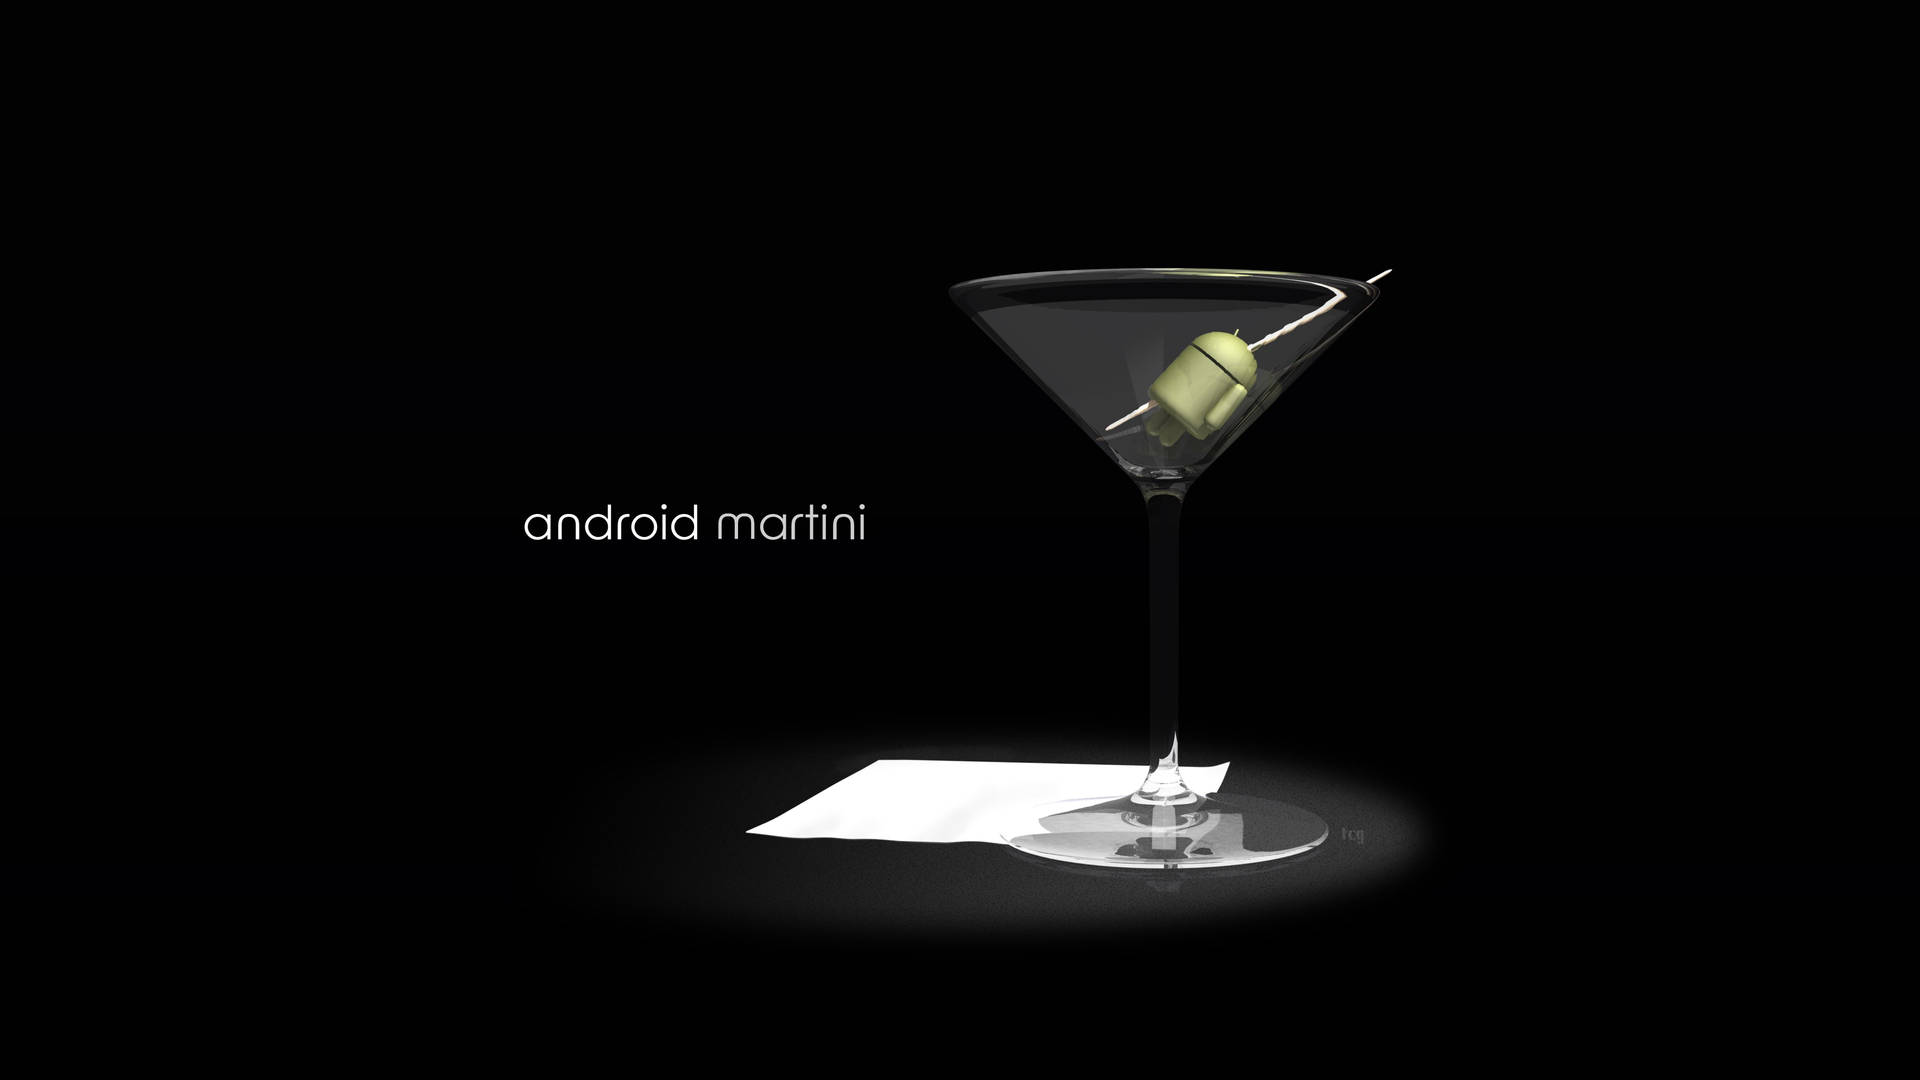 Take a sip of Android! Wallpaper